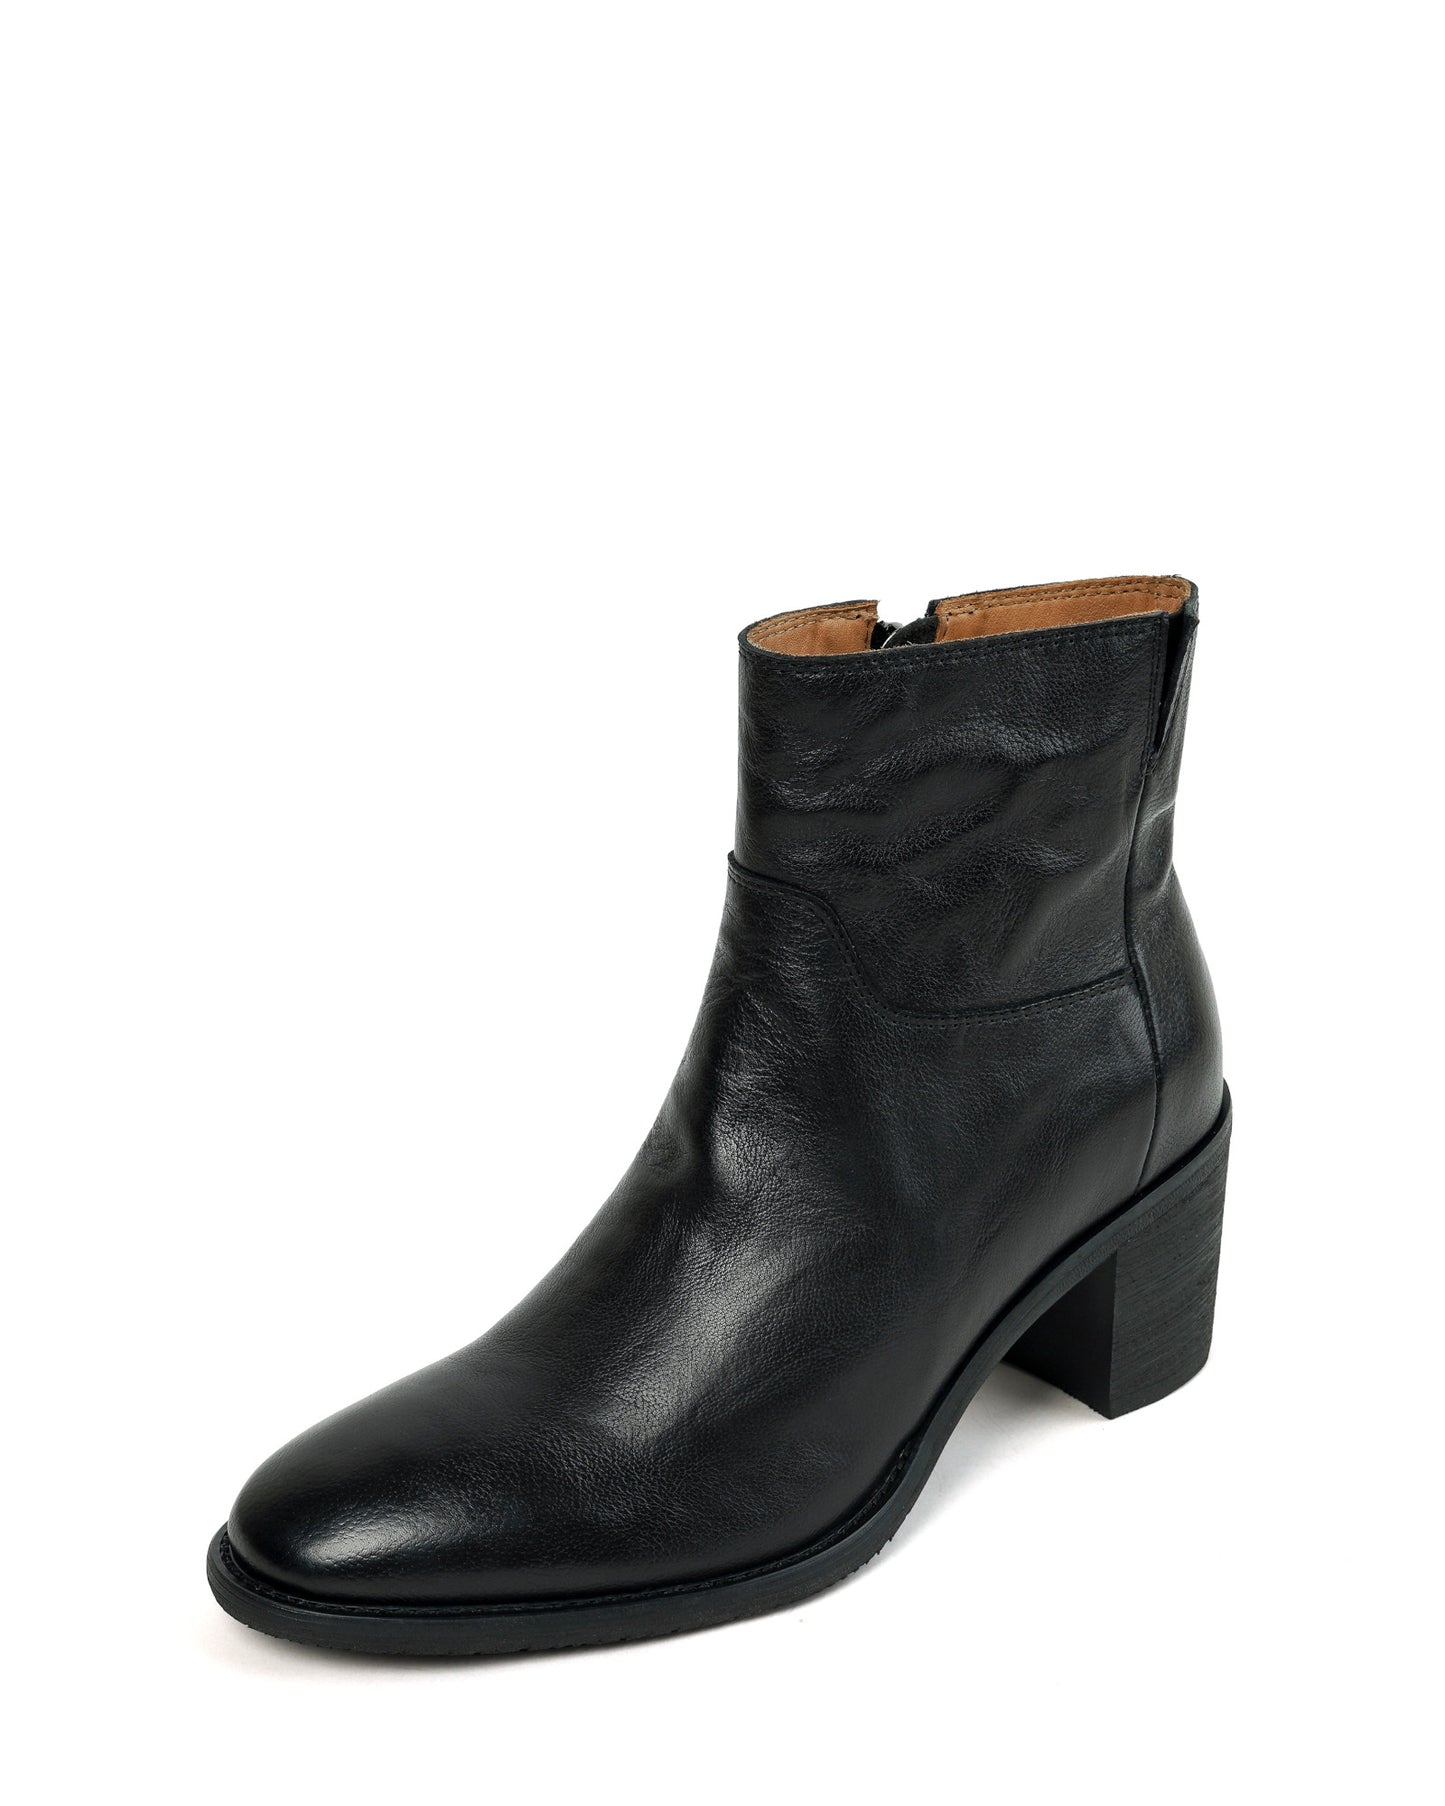 421-heeled-leather-boots-black